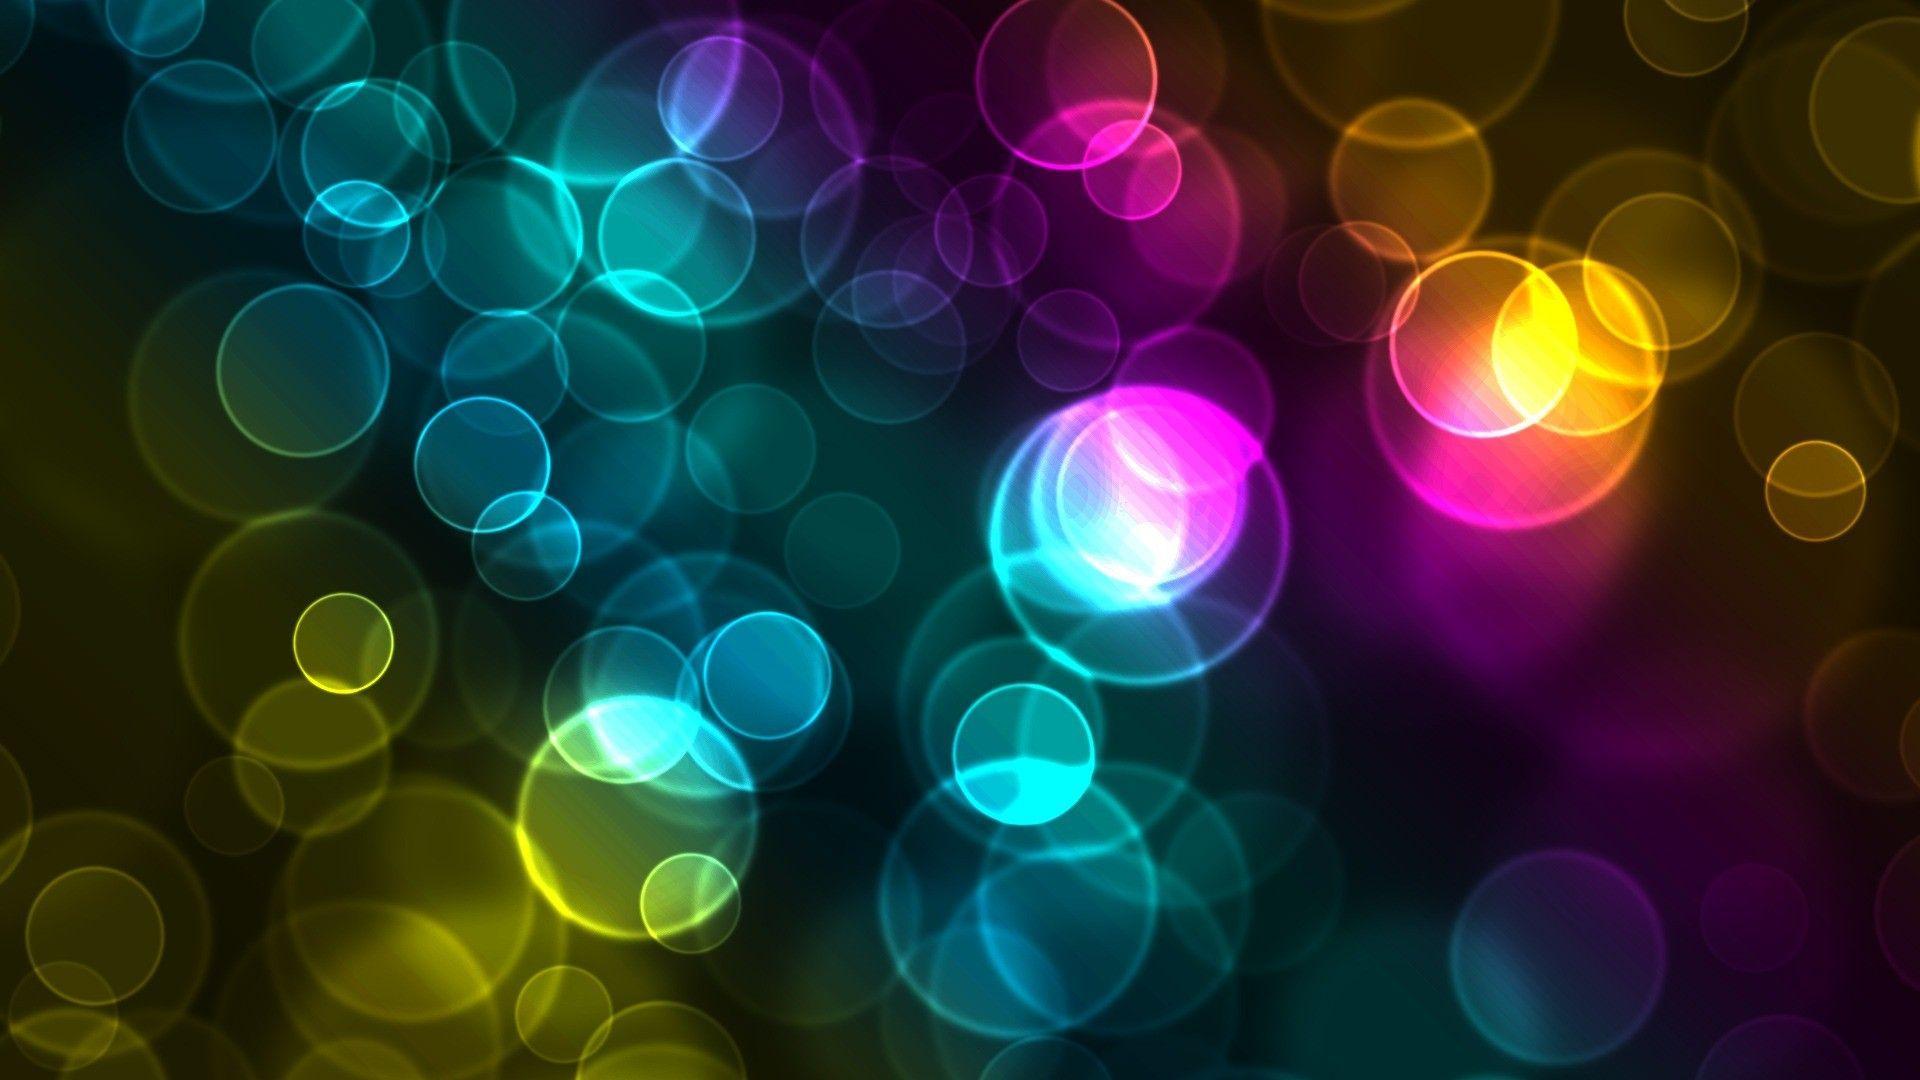 Abstract Glow Wallpaper 46432 2560x1600px